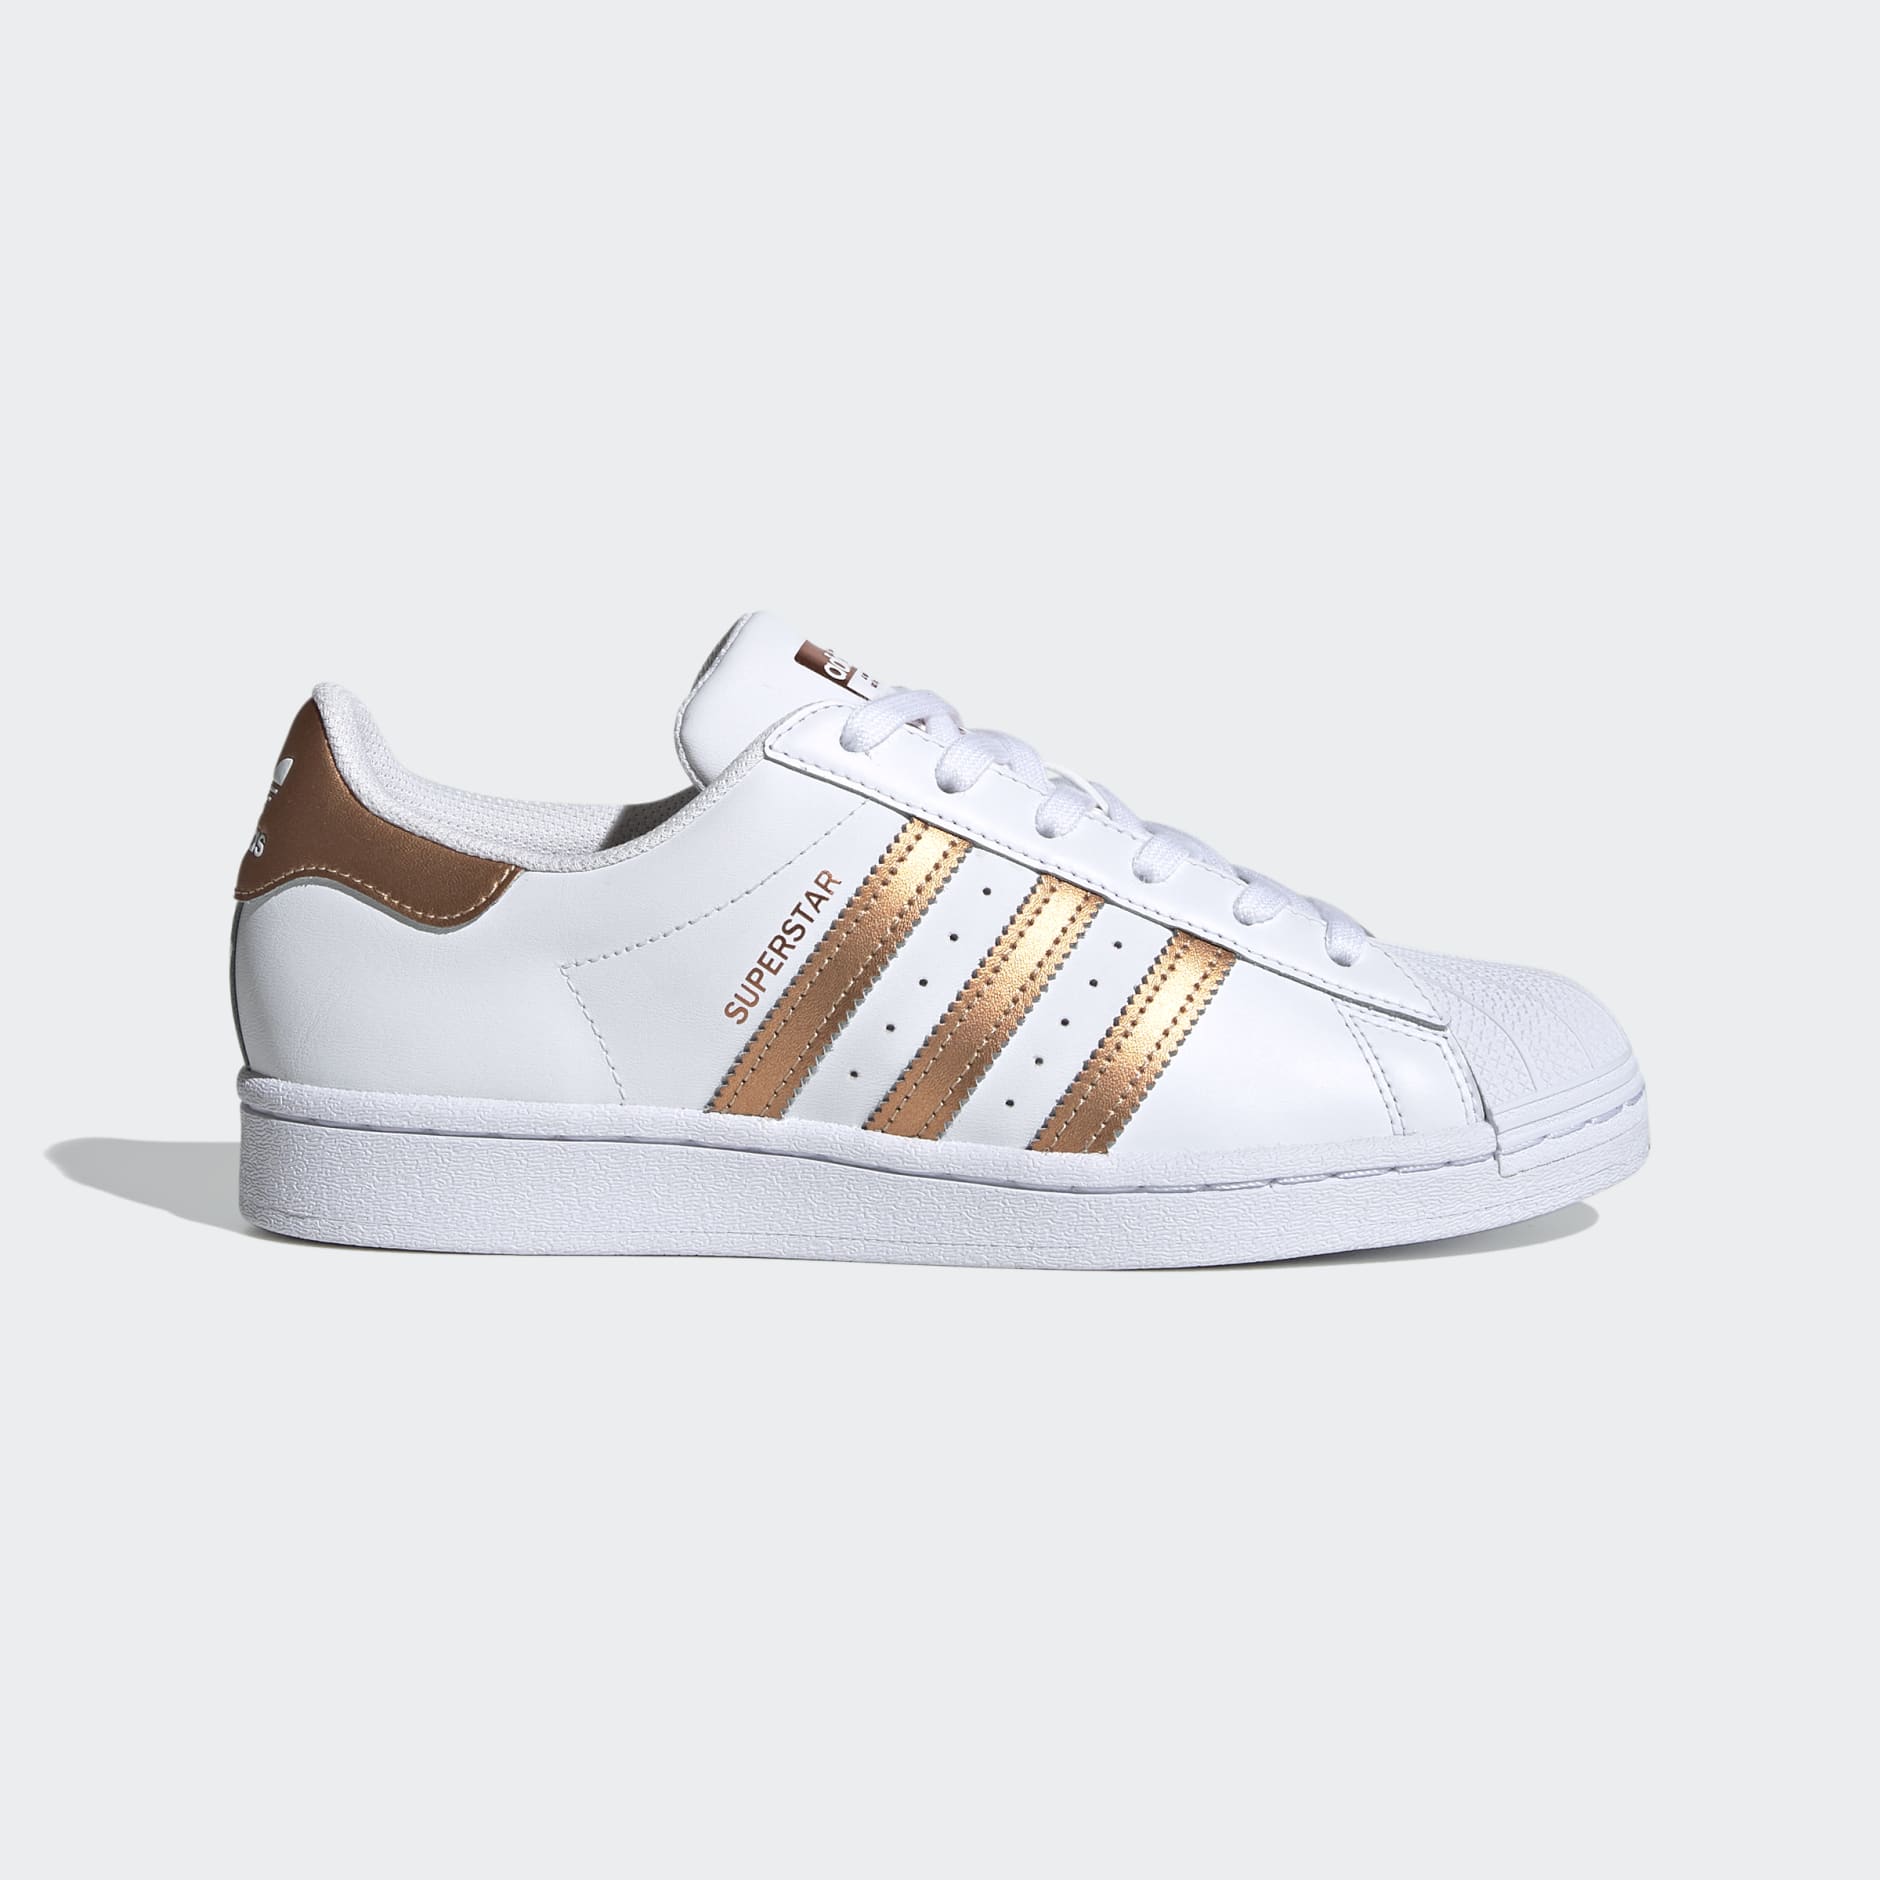 Women's Shoes - Superstar Shoes - White | adidas Egypt